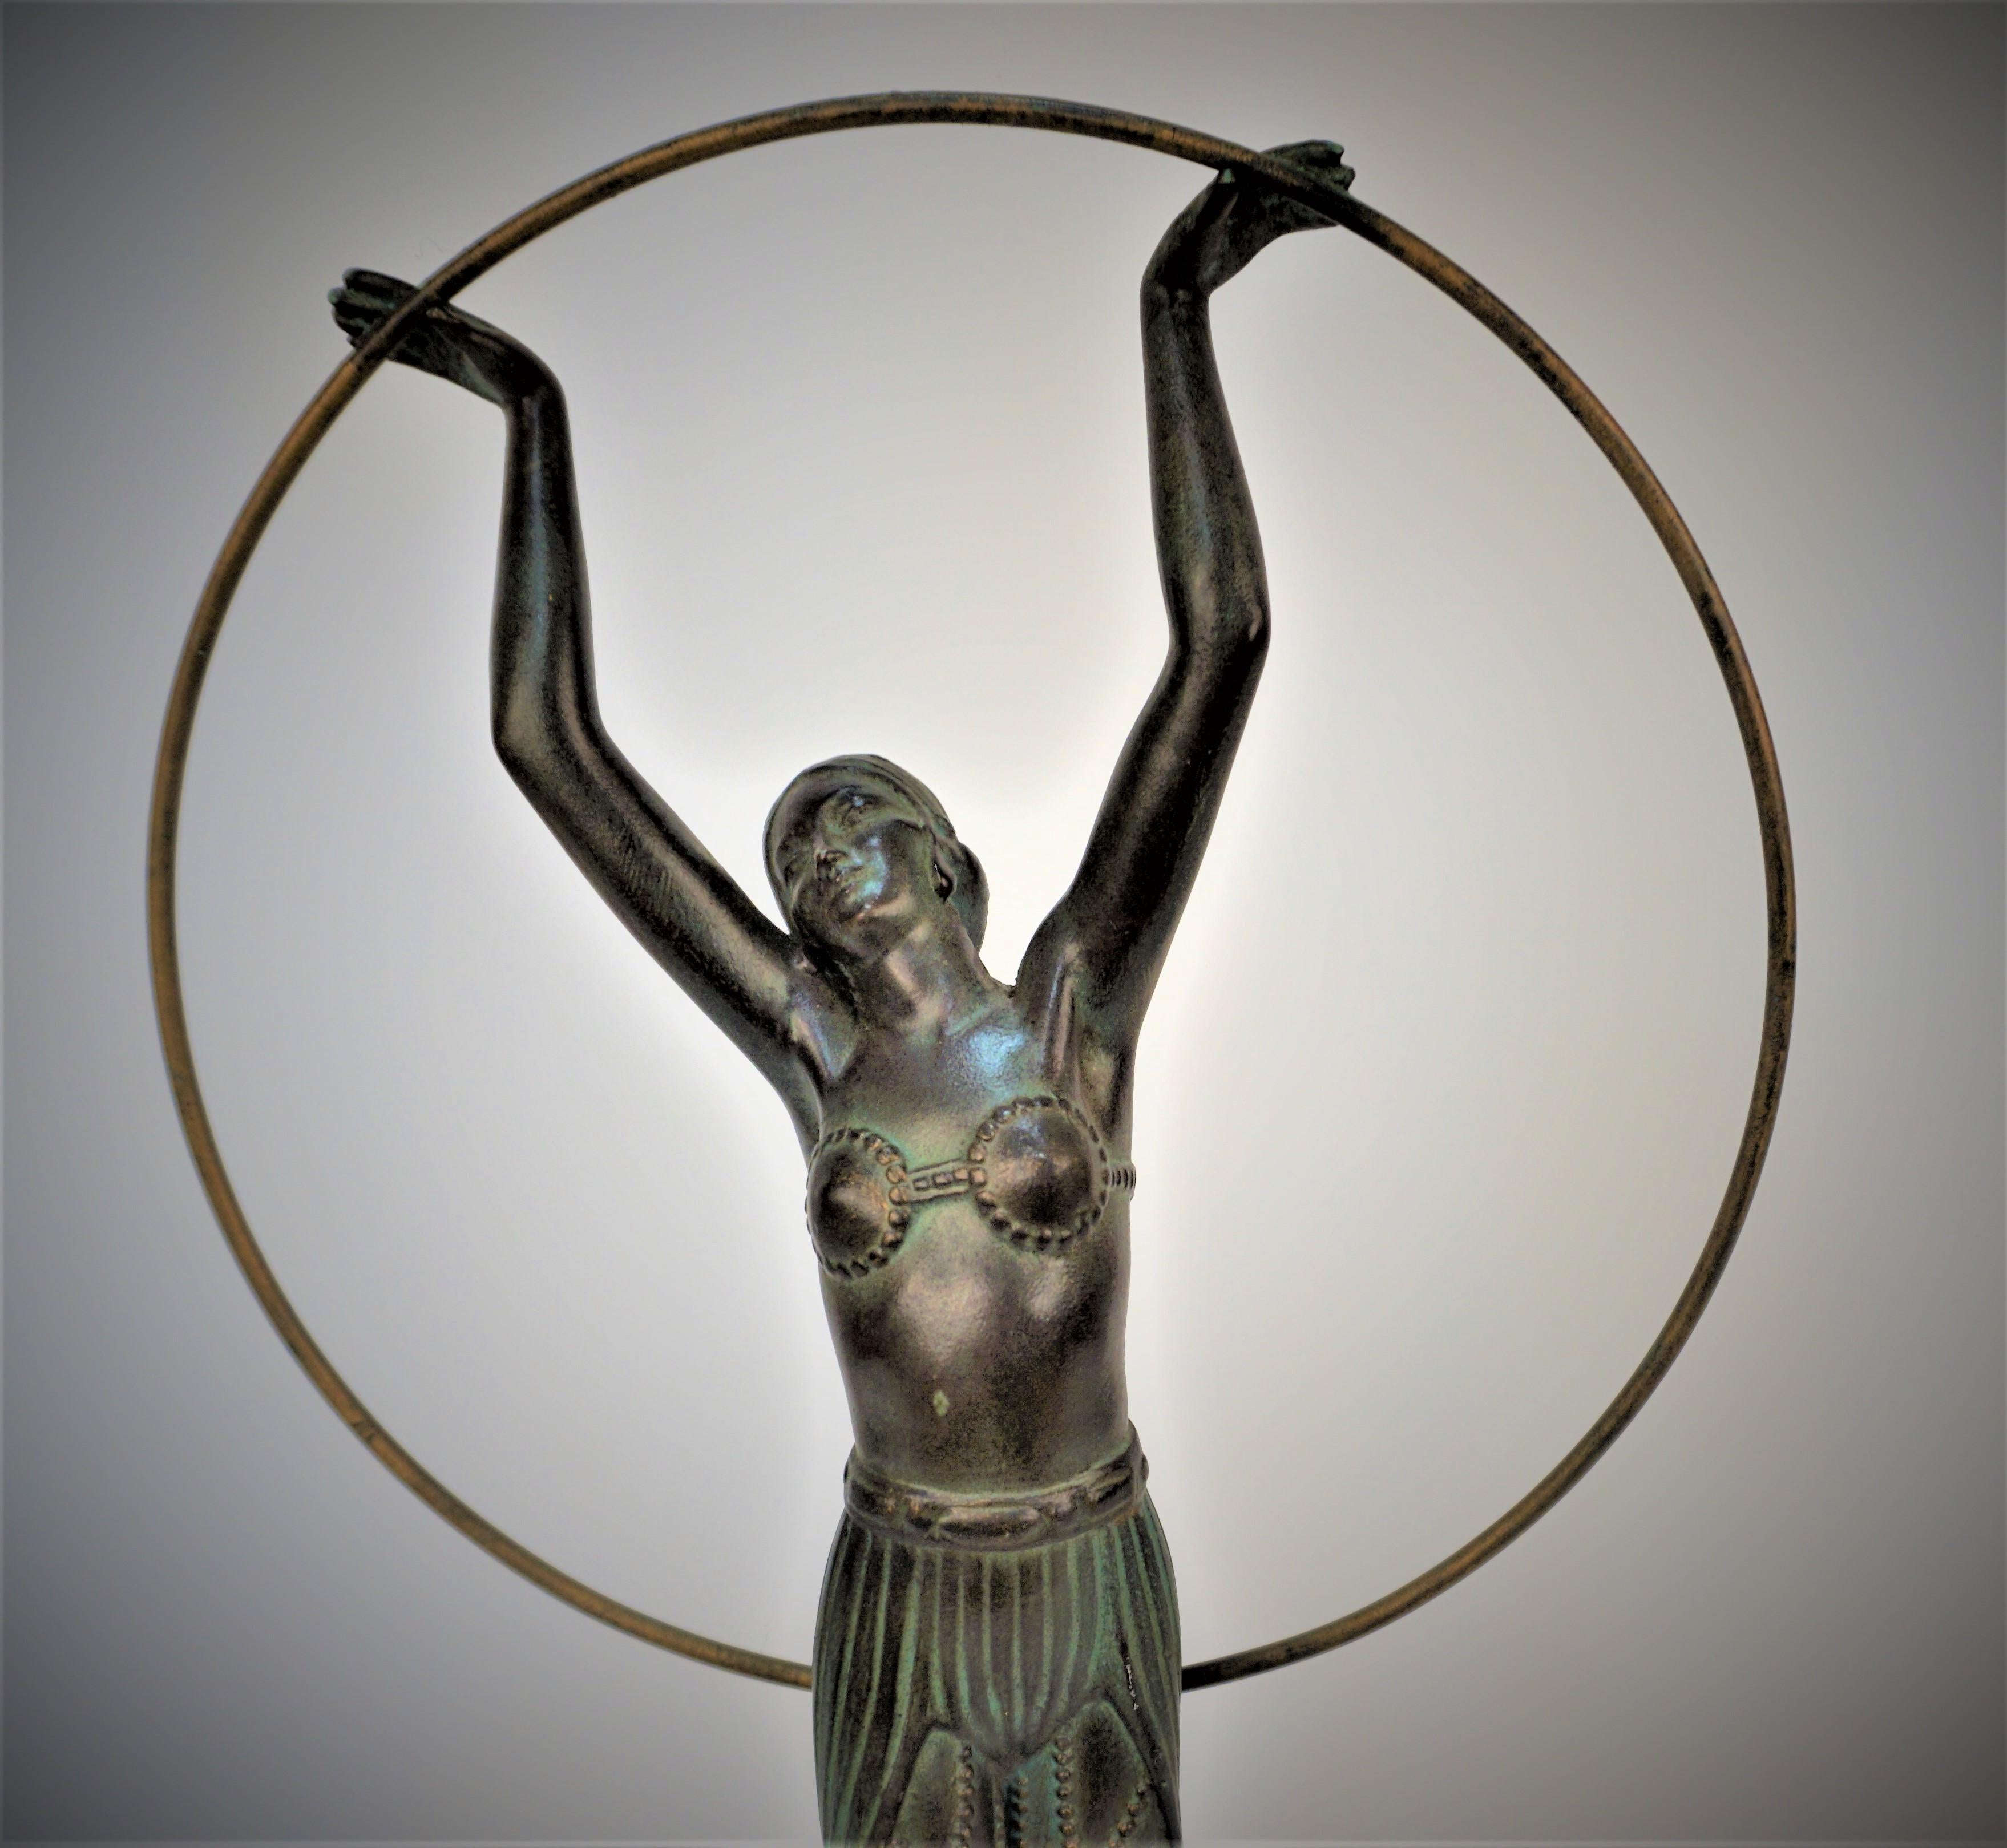 French 1920's art deco sculpture, hoop dancer stands on marble base.